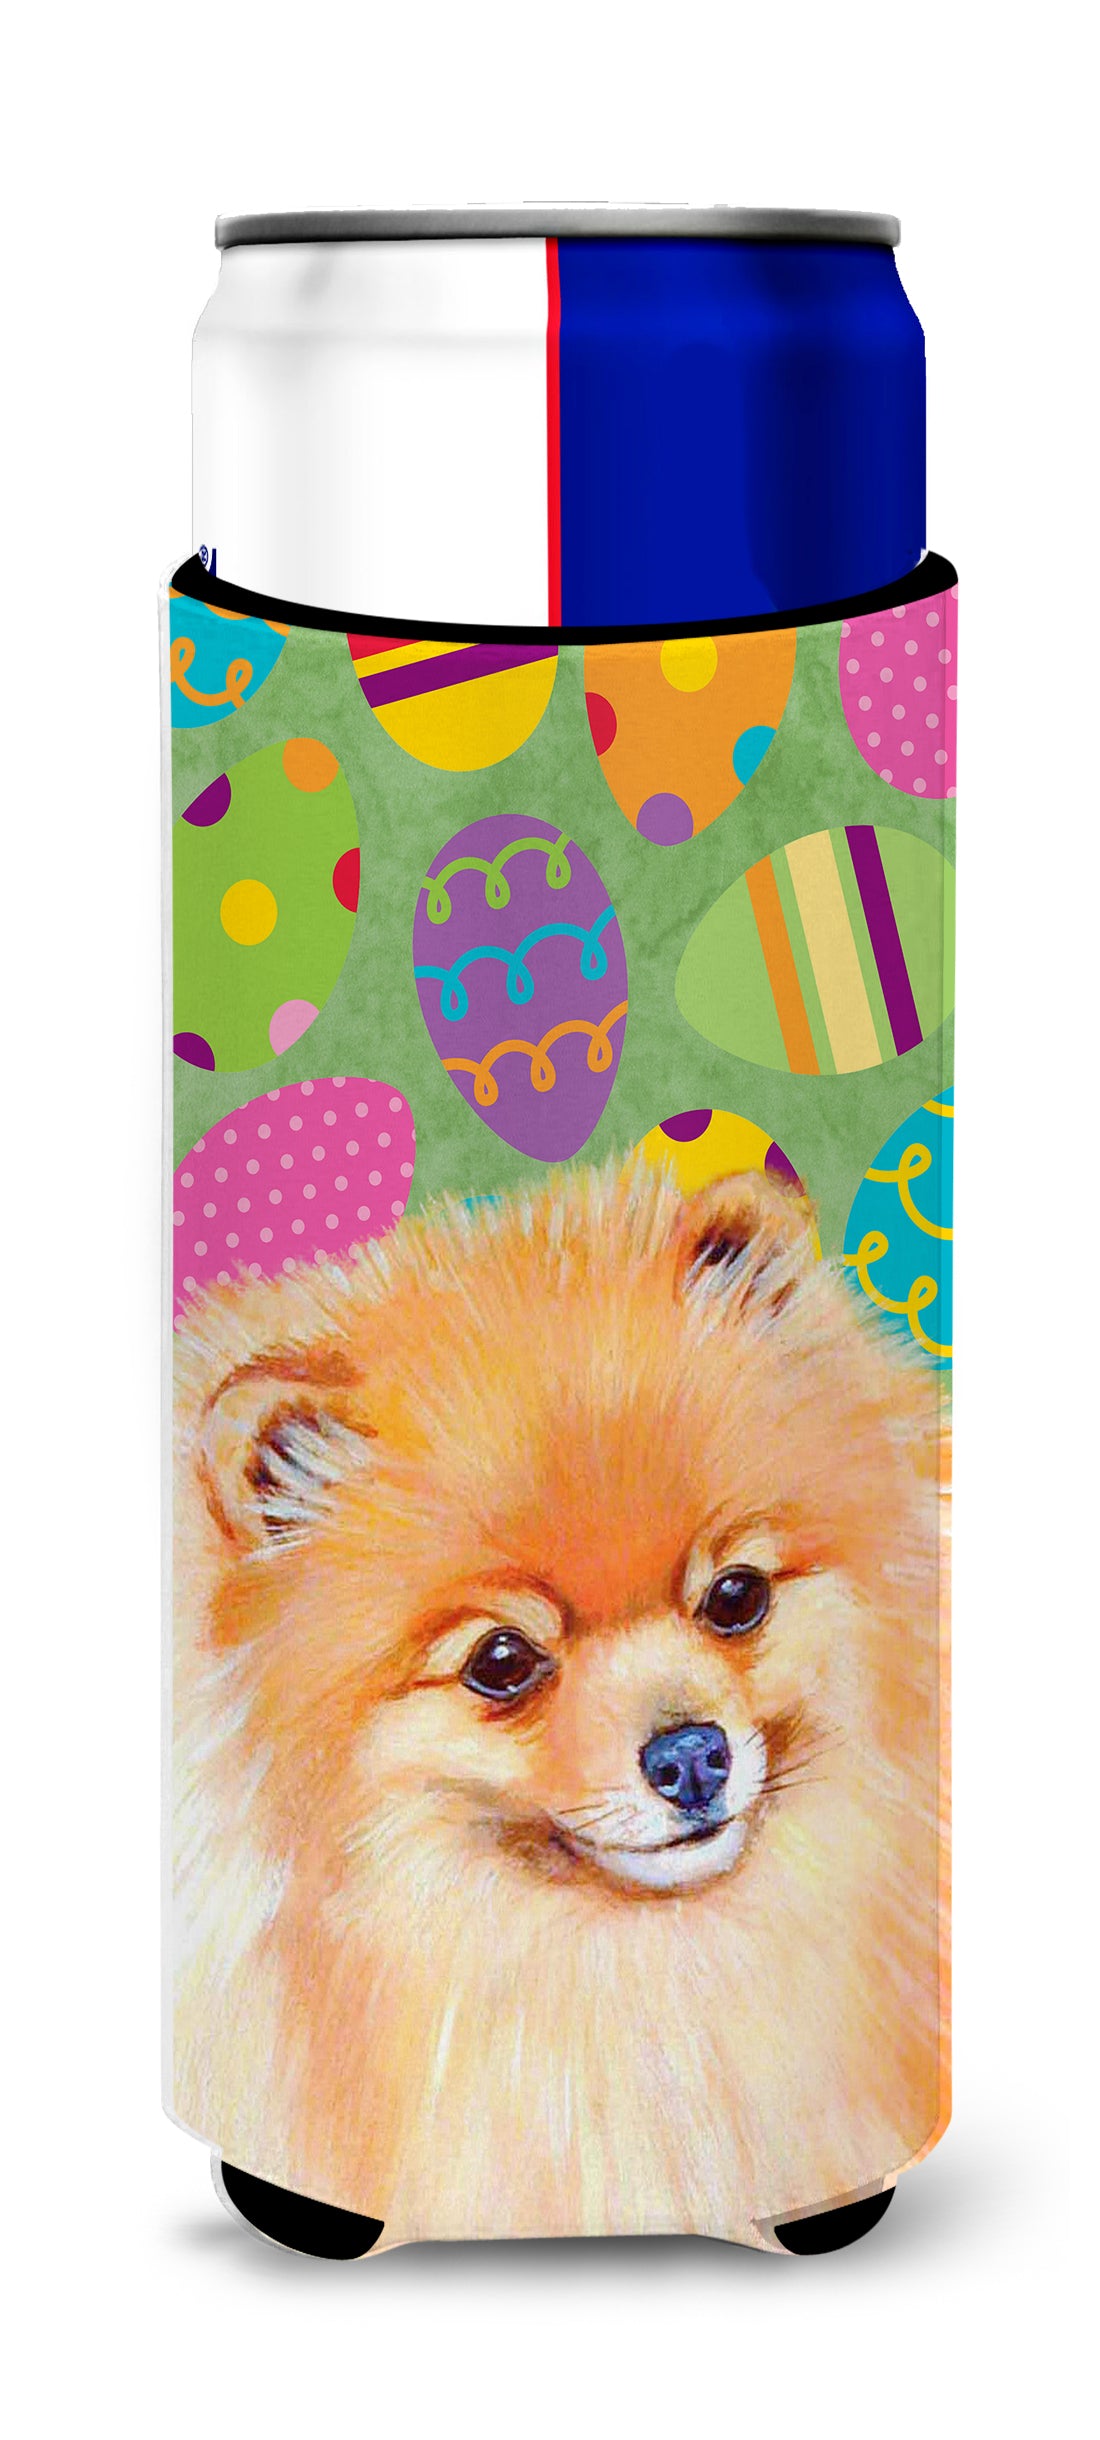 Pomeranian Easter Eggtravaganza Ultra Beverage Insulators for slim cans LH9440MUK.